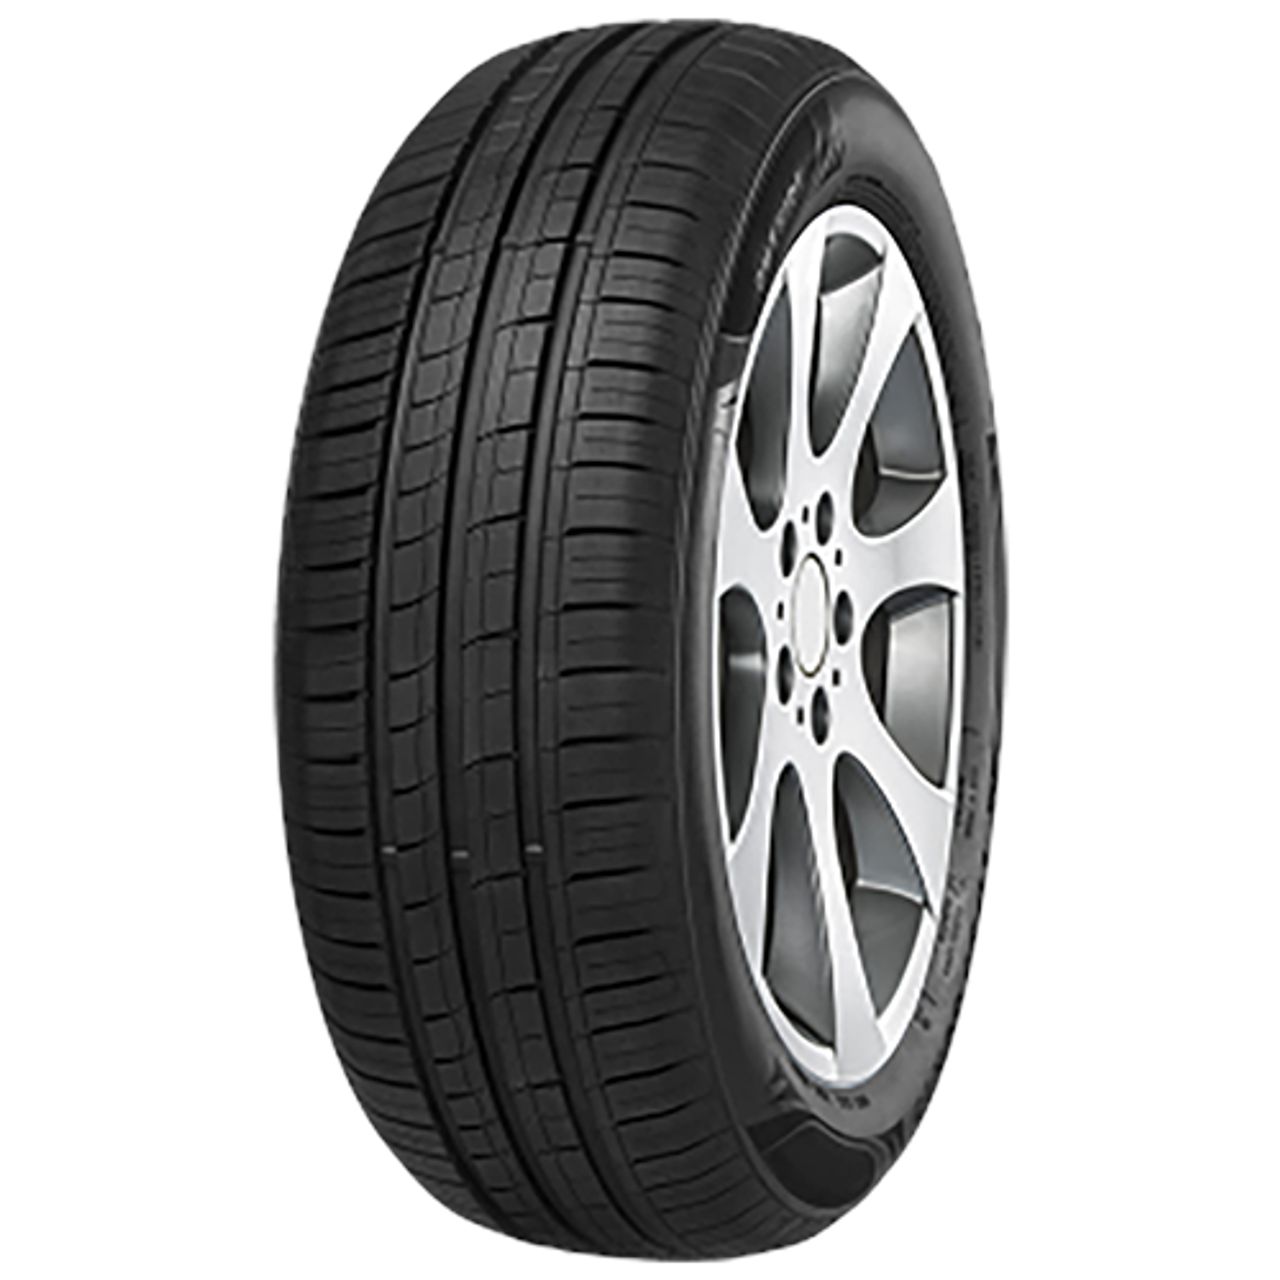 IMPERIAL ECODRIVER 4 185/60R14 82H